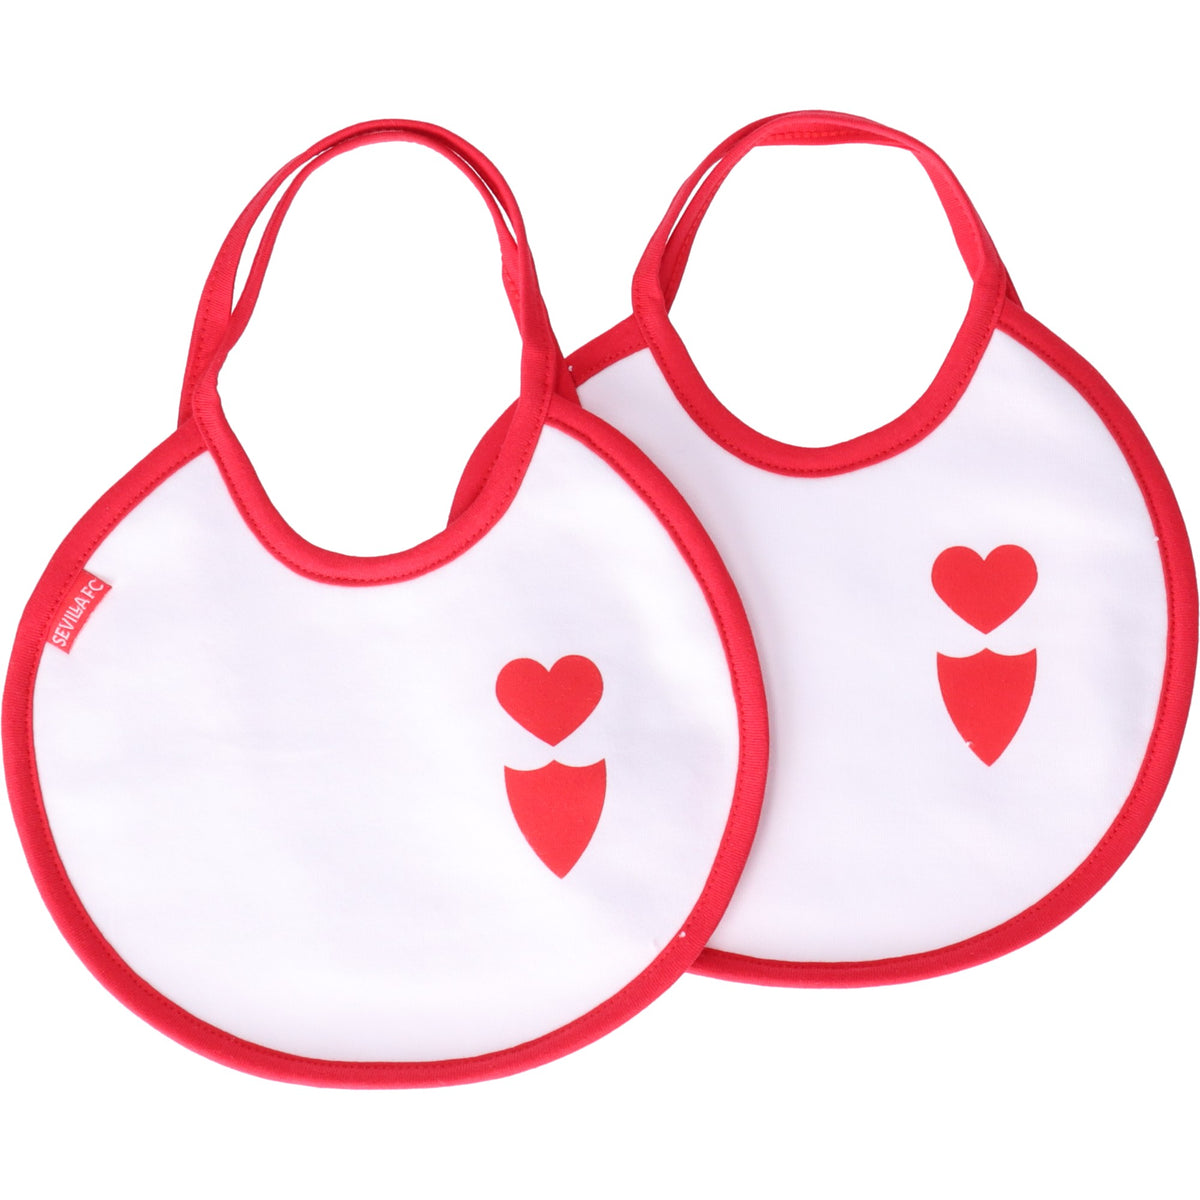 Babie bib with red heart